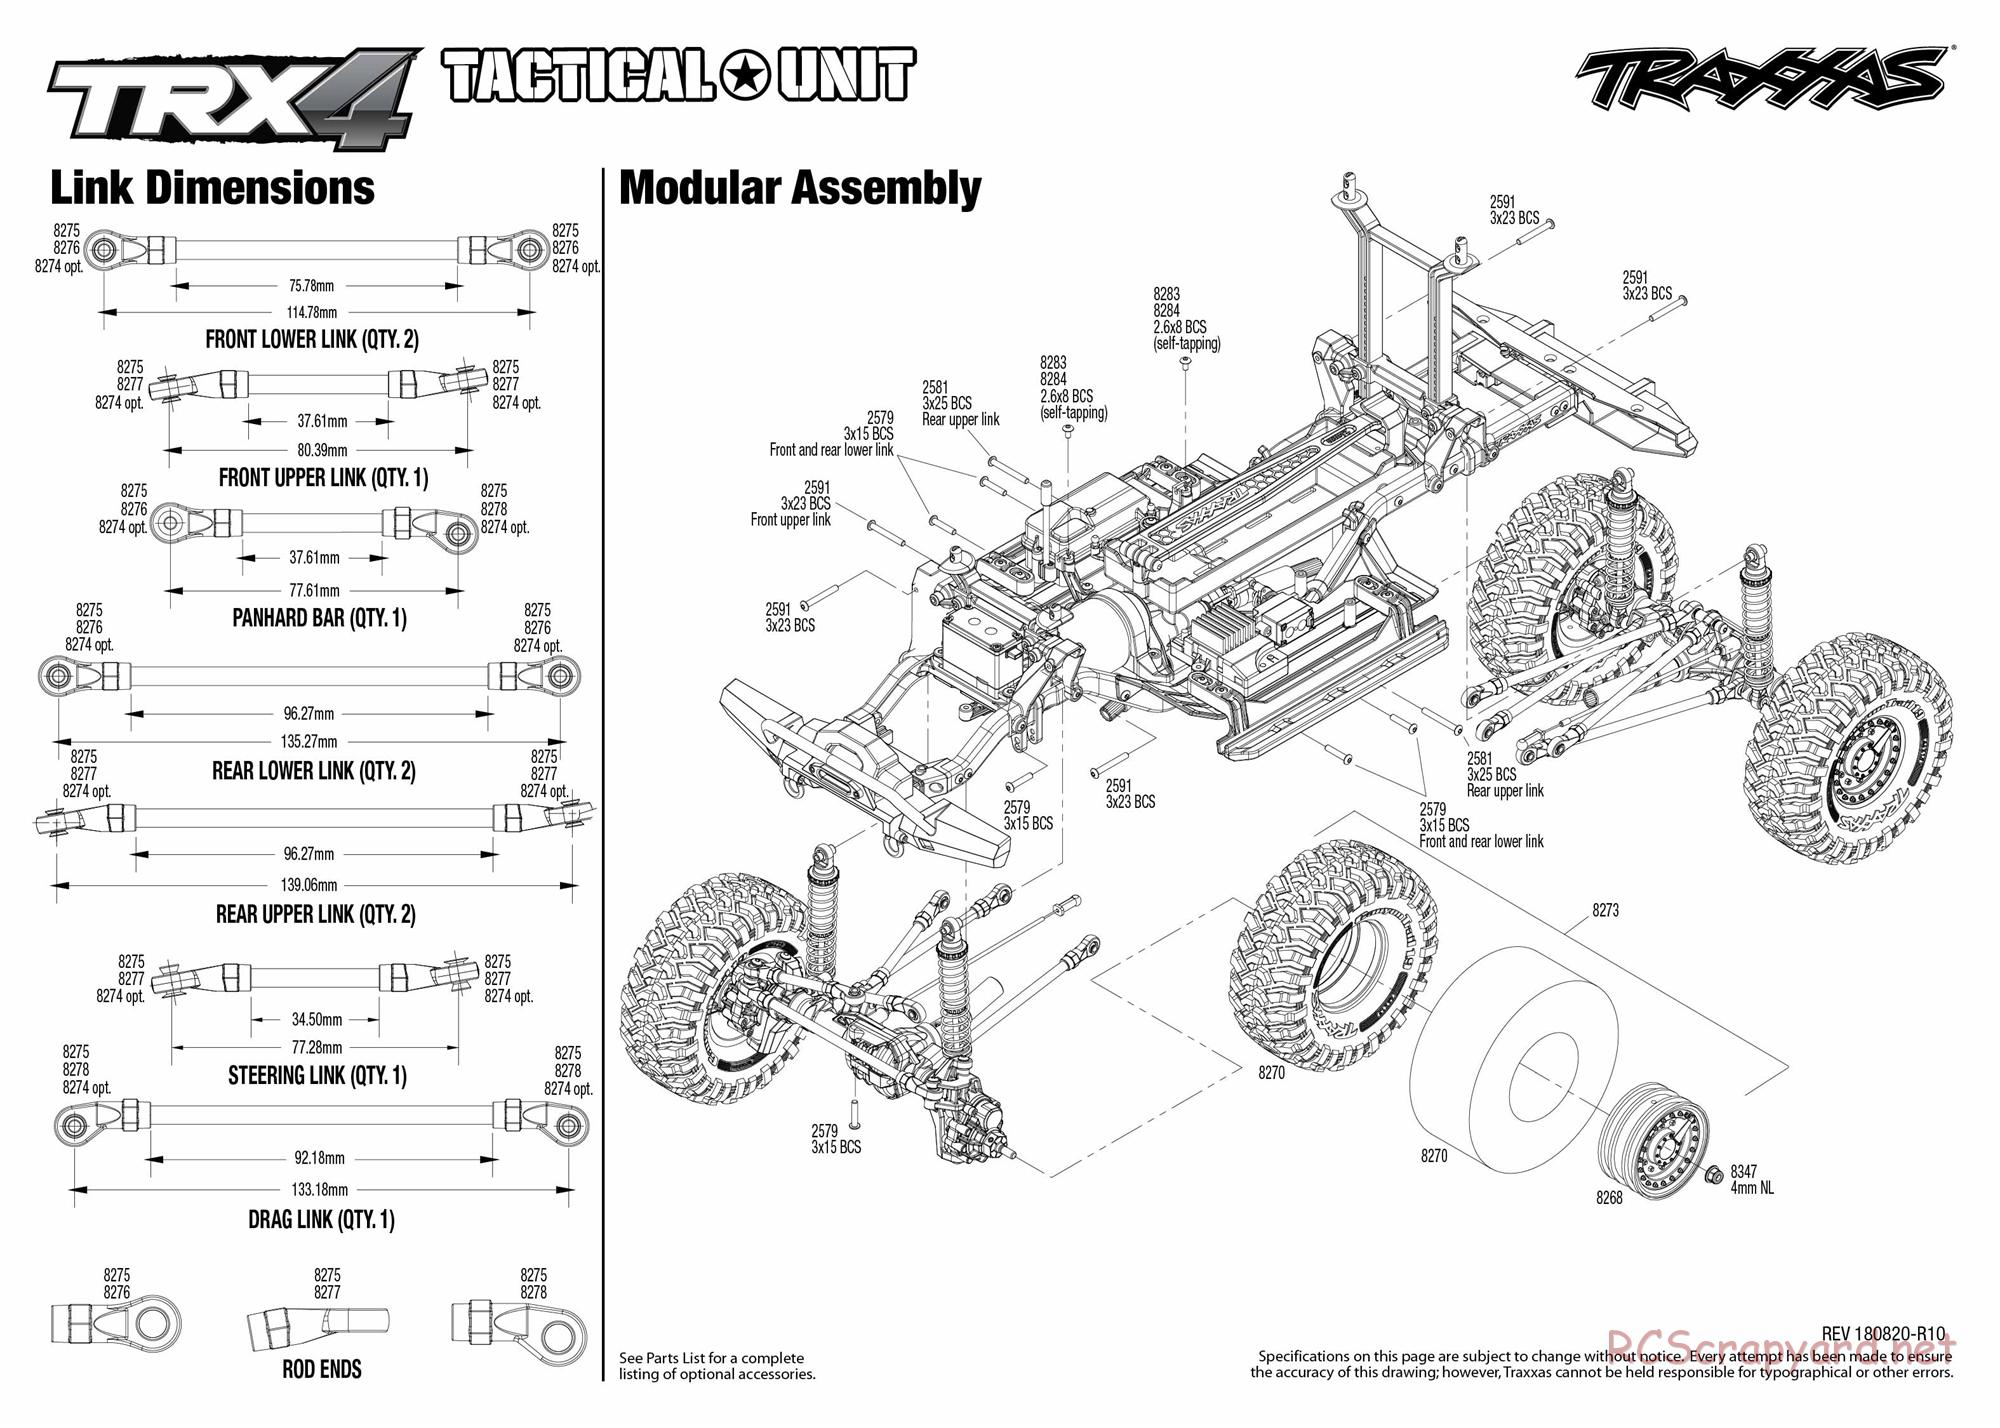 Traxxas - TRX-4 Tactical Unit (2018) - Exploded Views - Page 4